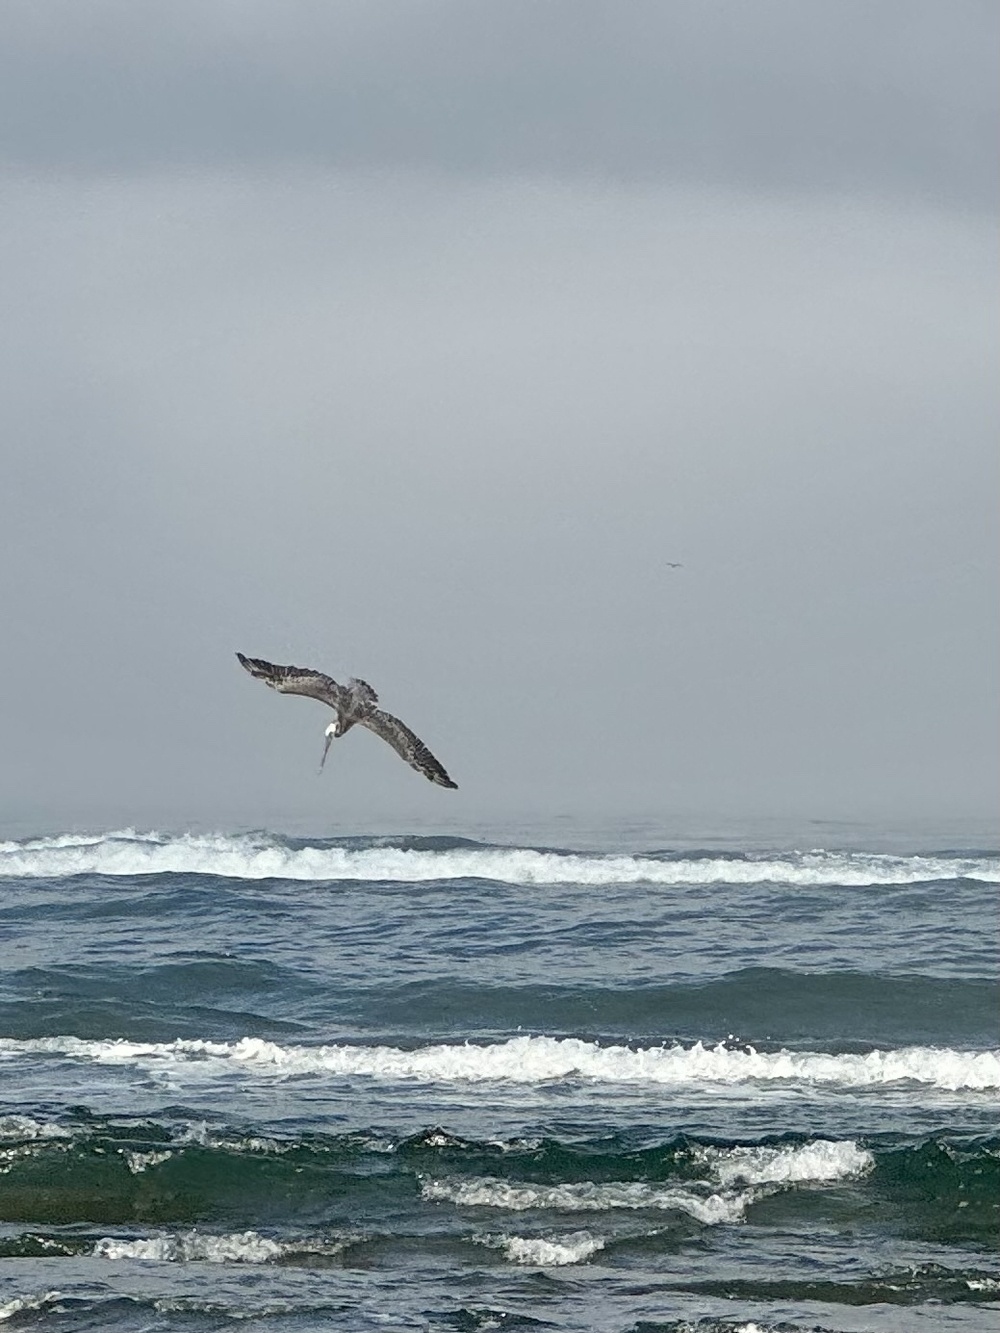 Pelican diving into the waves. 